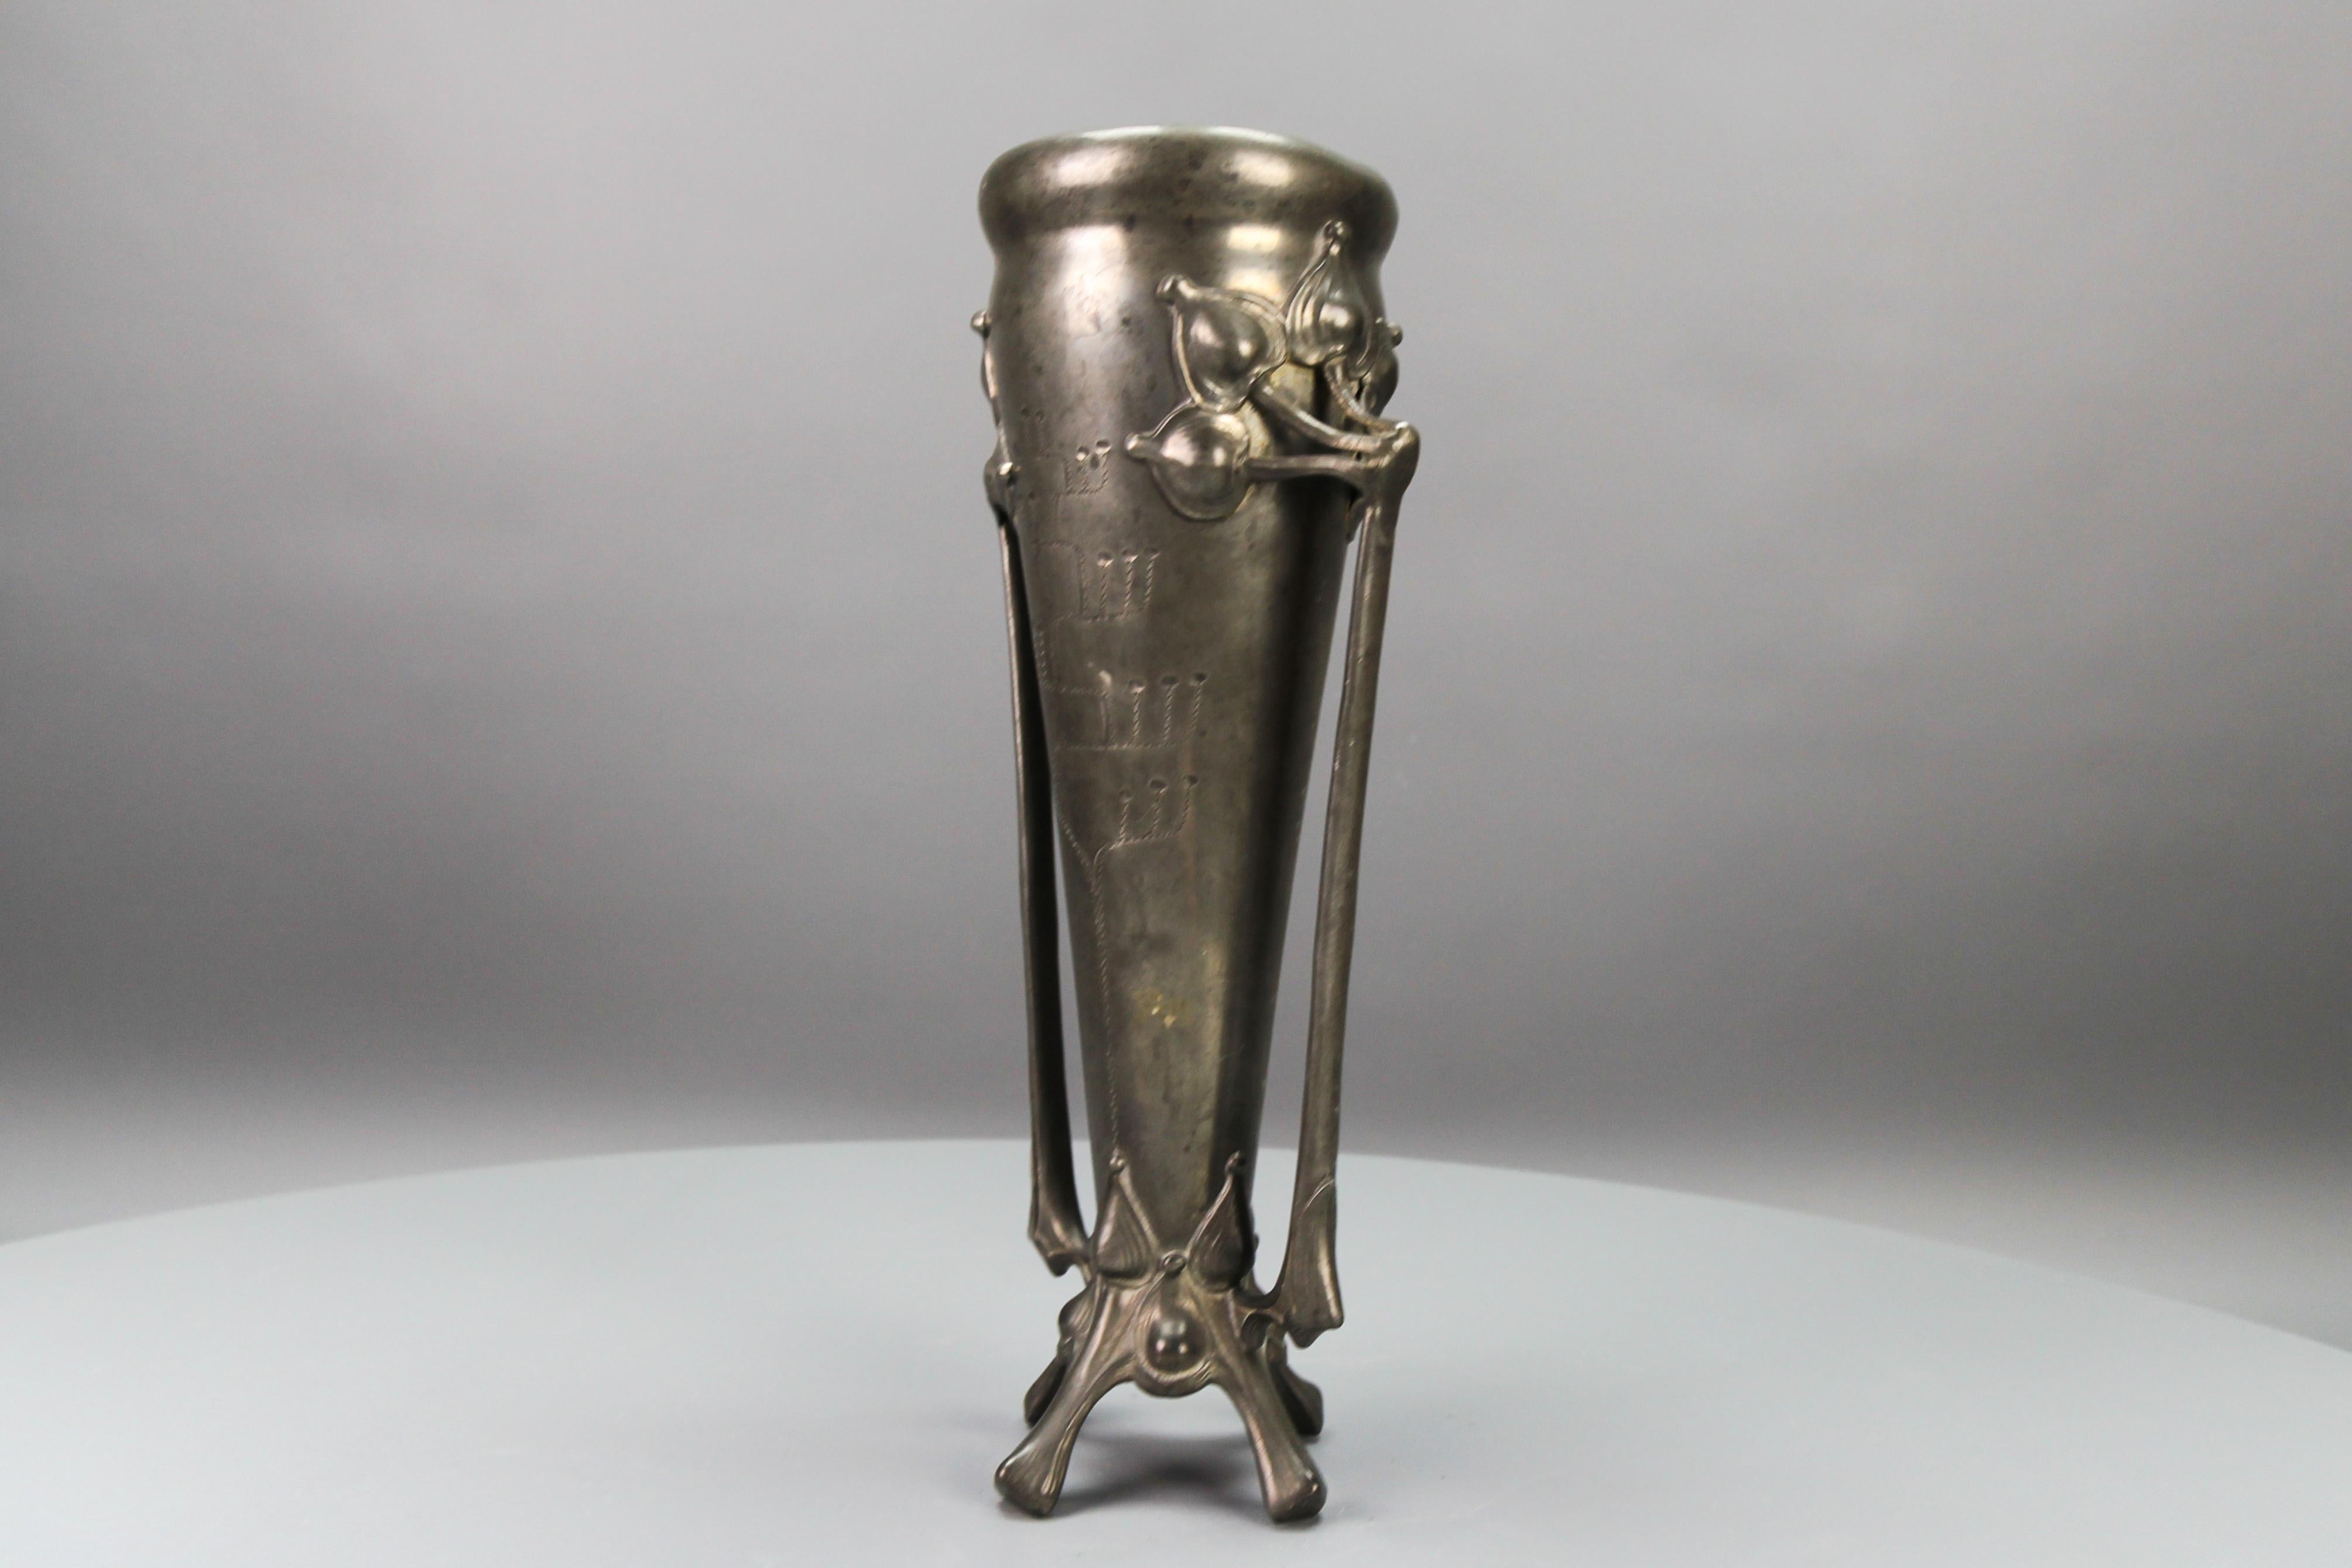 Art Nouveau Pewter Vase with Plant Motifs, Early 20th Century For Sale 1